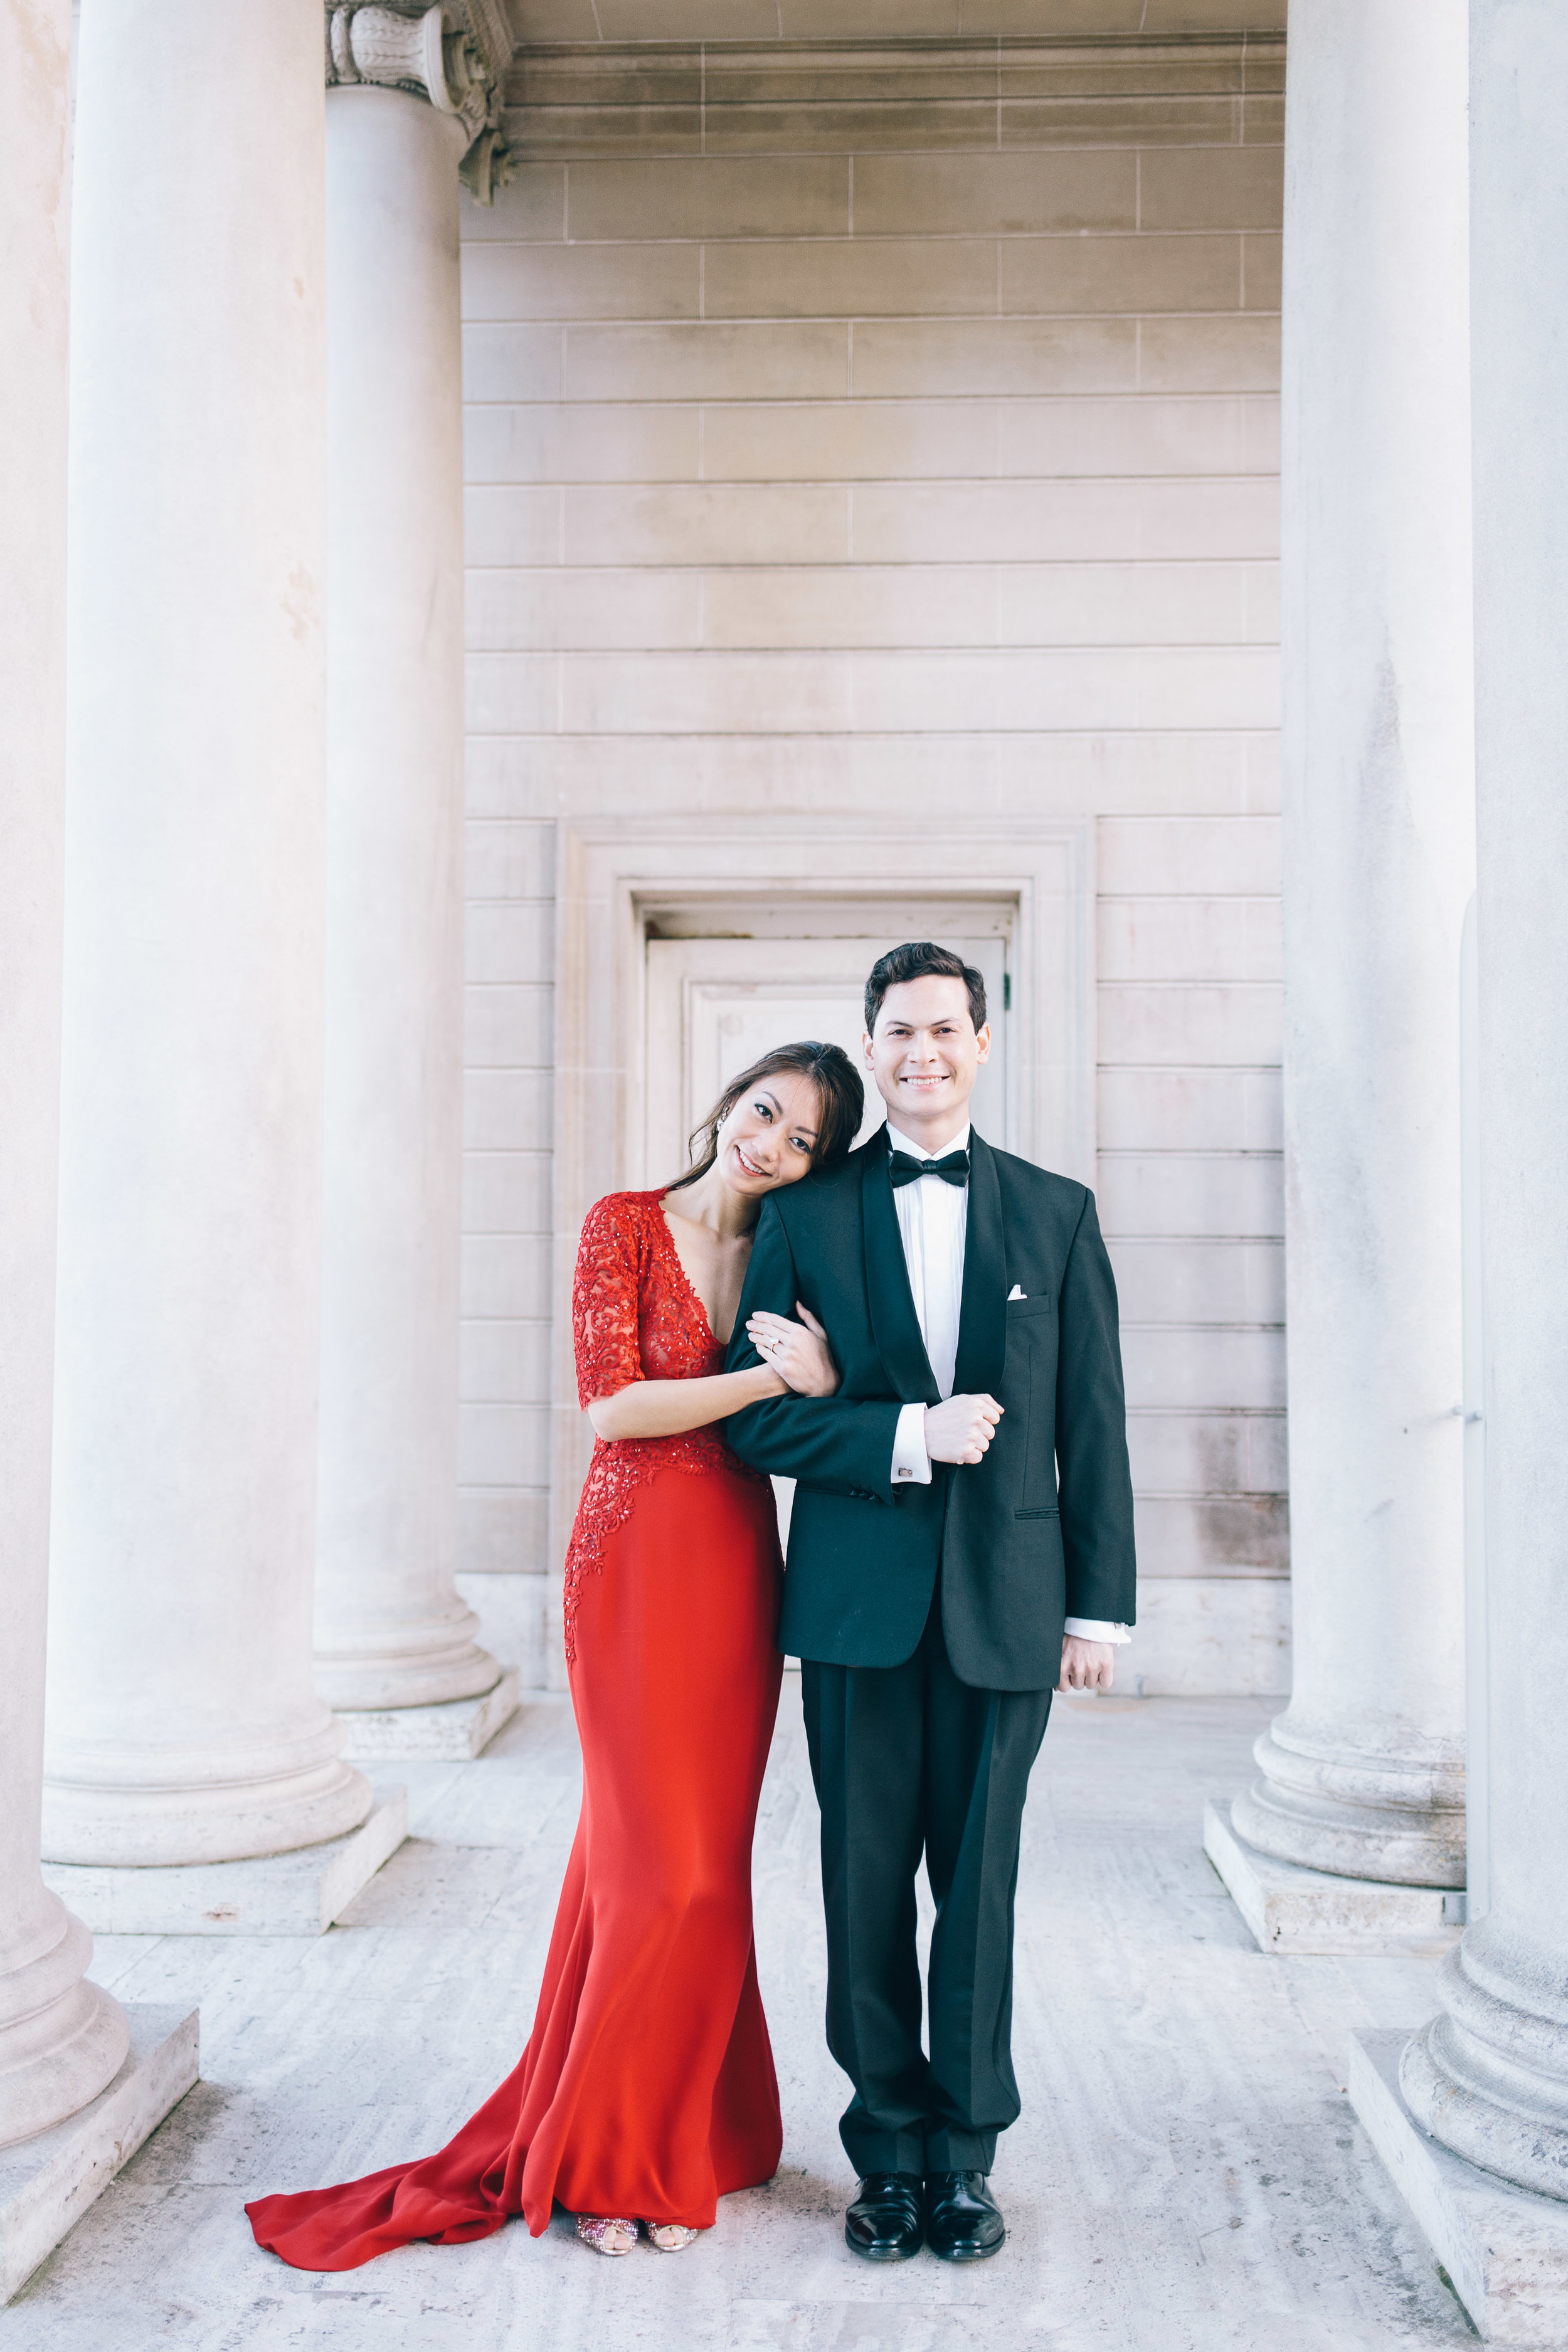 Legion of Honor Engagement Photos by JBJ Pictures - Best Locations for Engagement Photos in SF (7).jpg